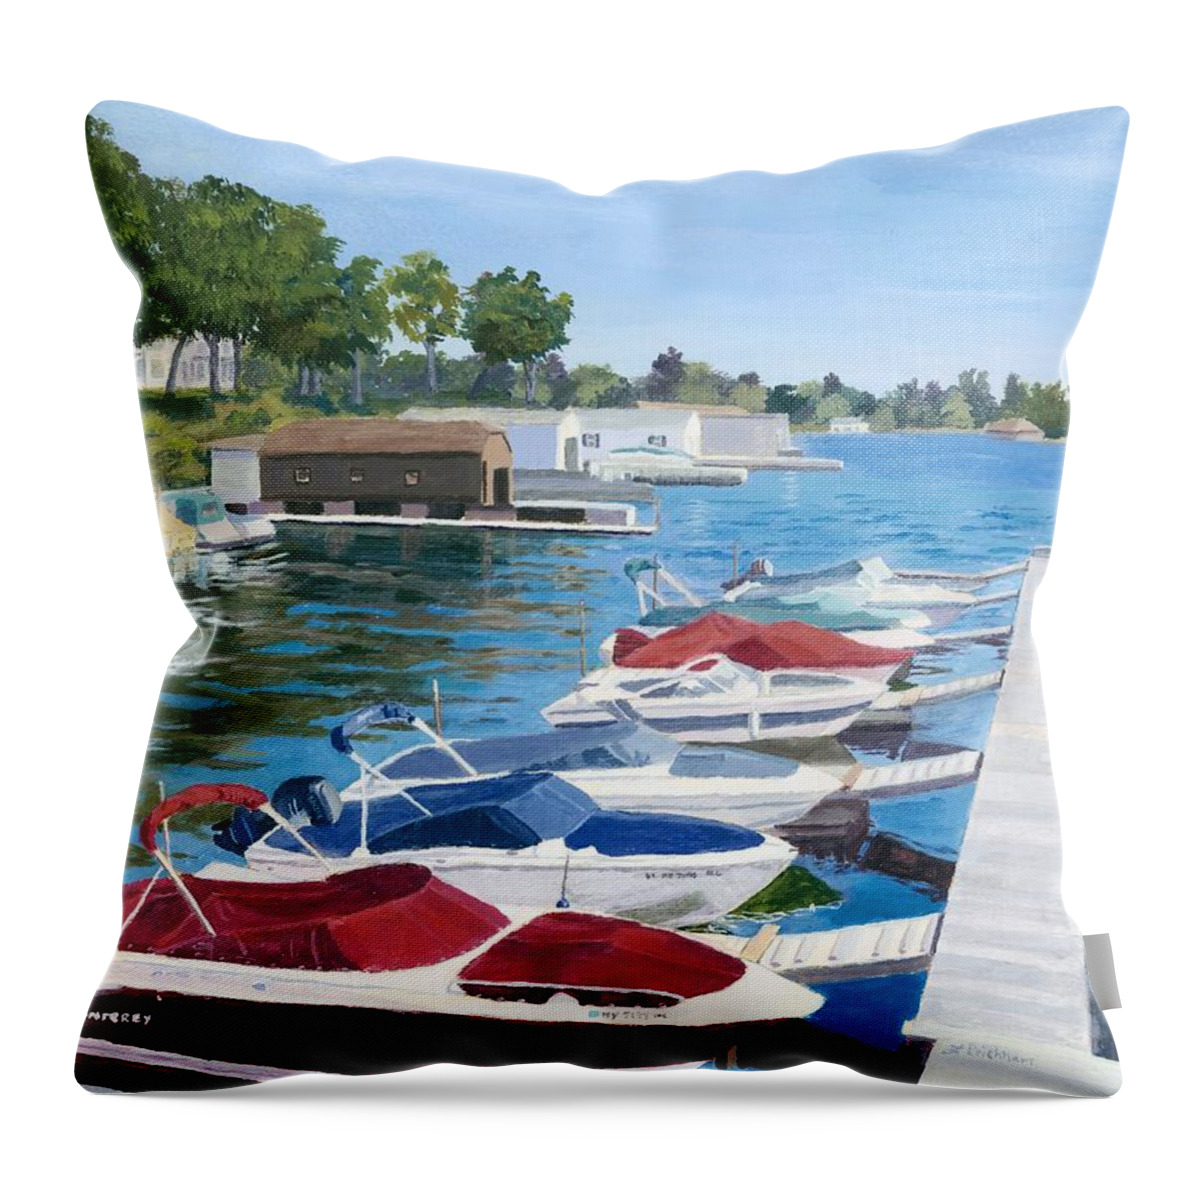 Marina Throw Pillow featuring the painting T.I. Park Marina by Lynne Reichhart